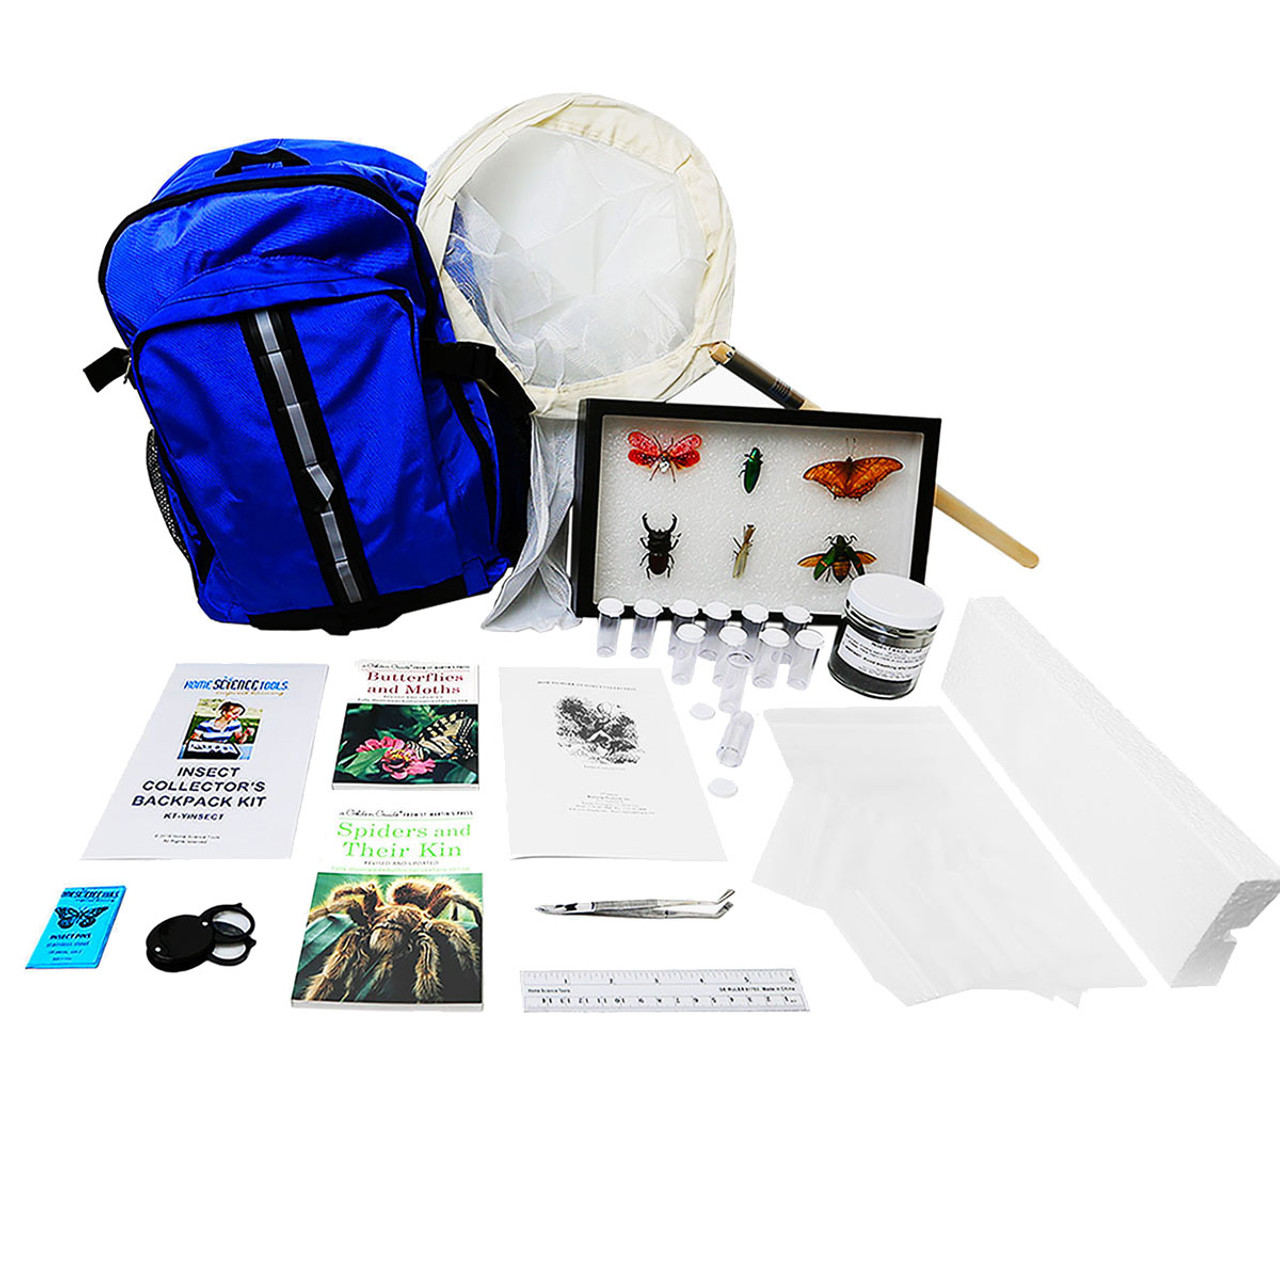 Insect Collector's Backpack Kit, Home Science Tools